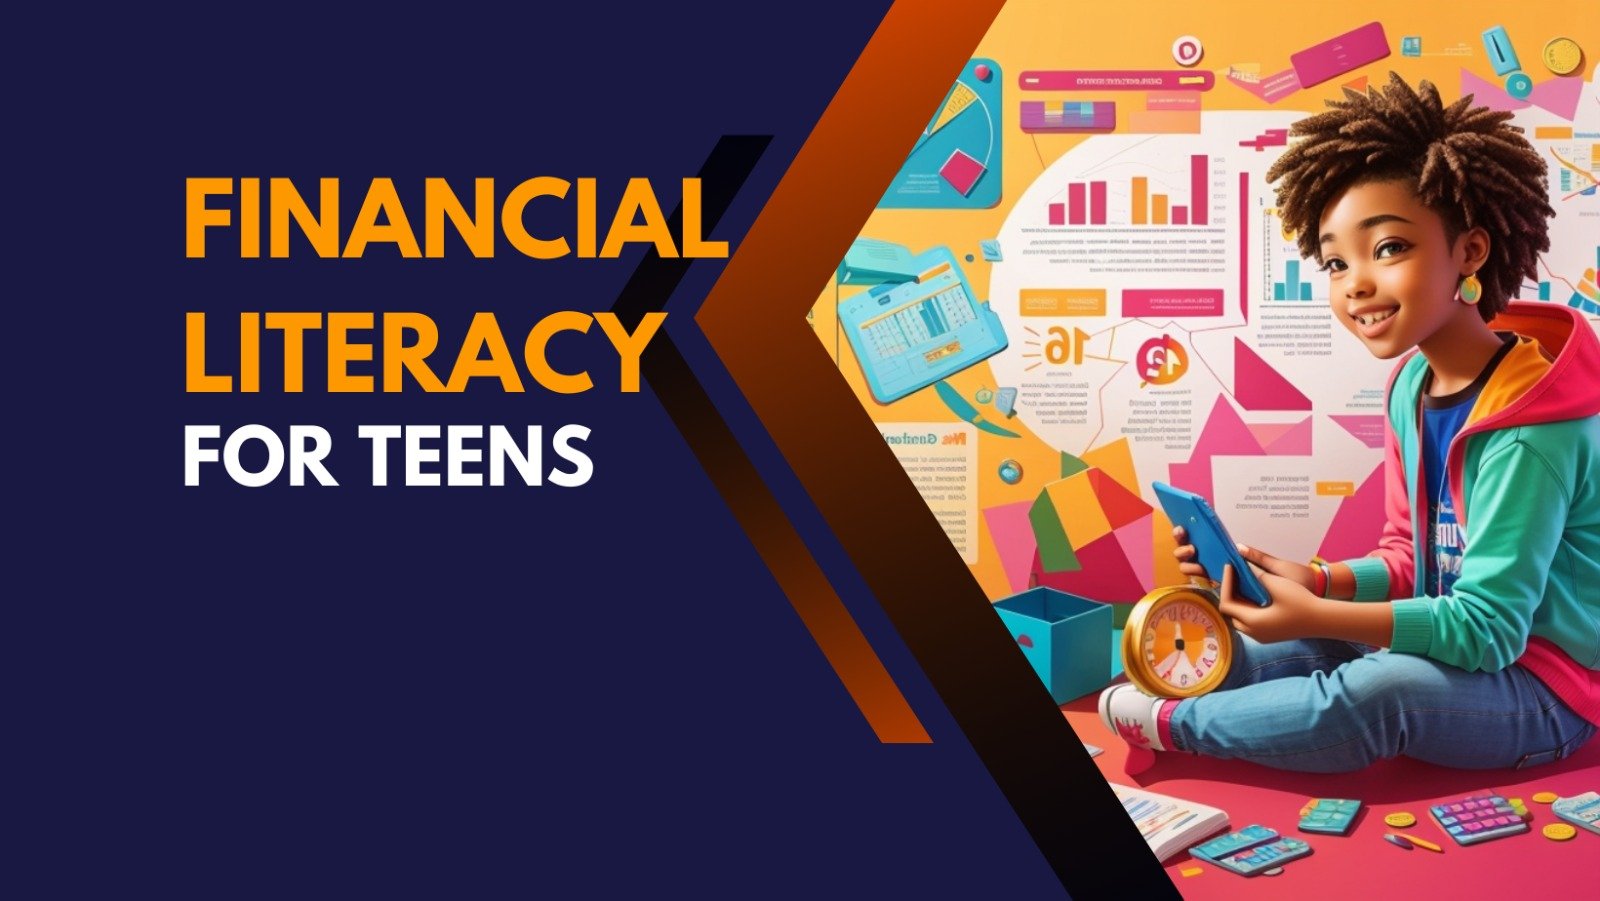 A Guide to Financial Literacy for Teens